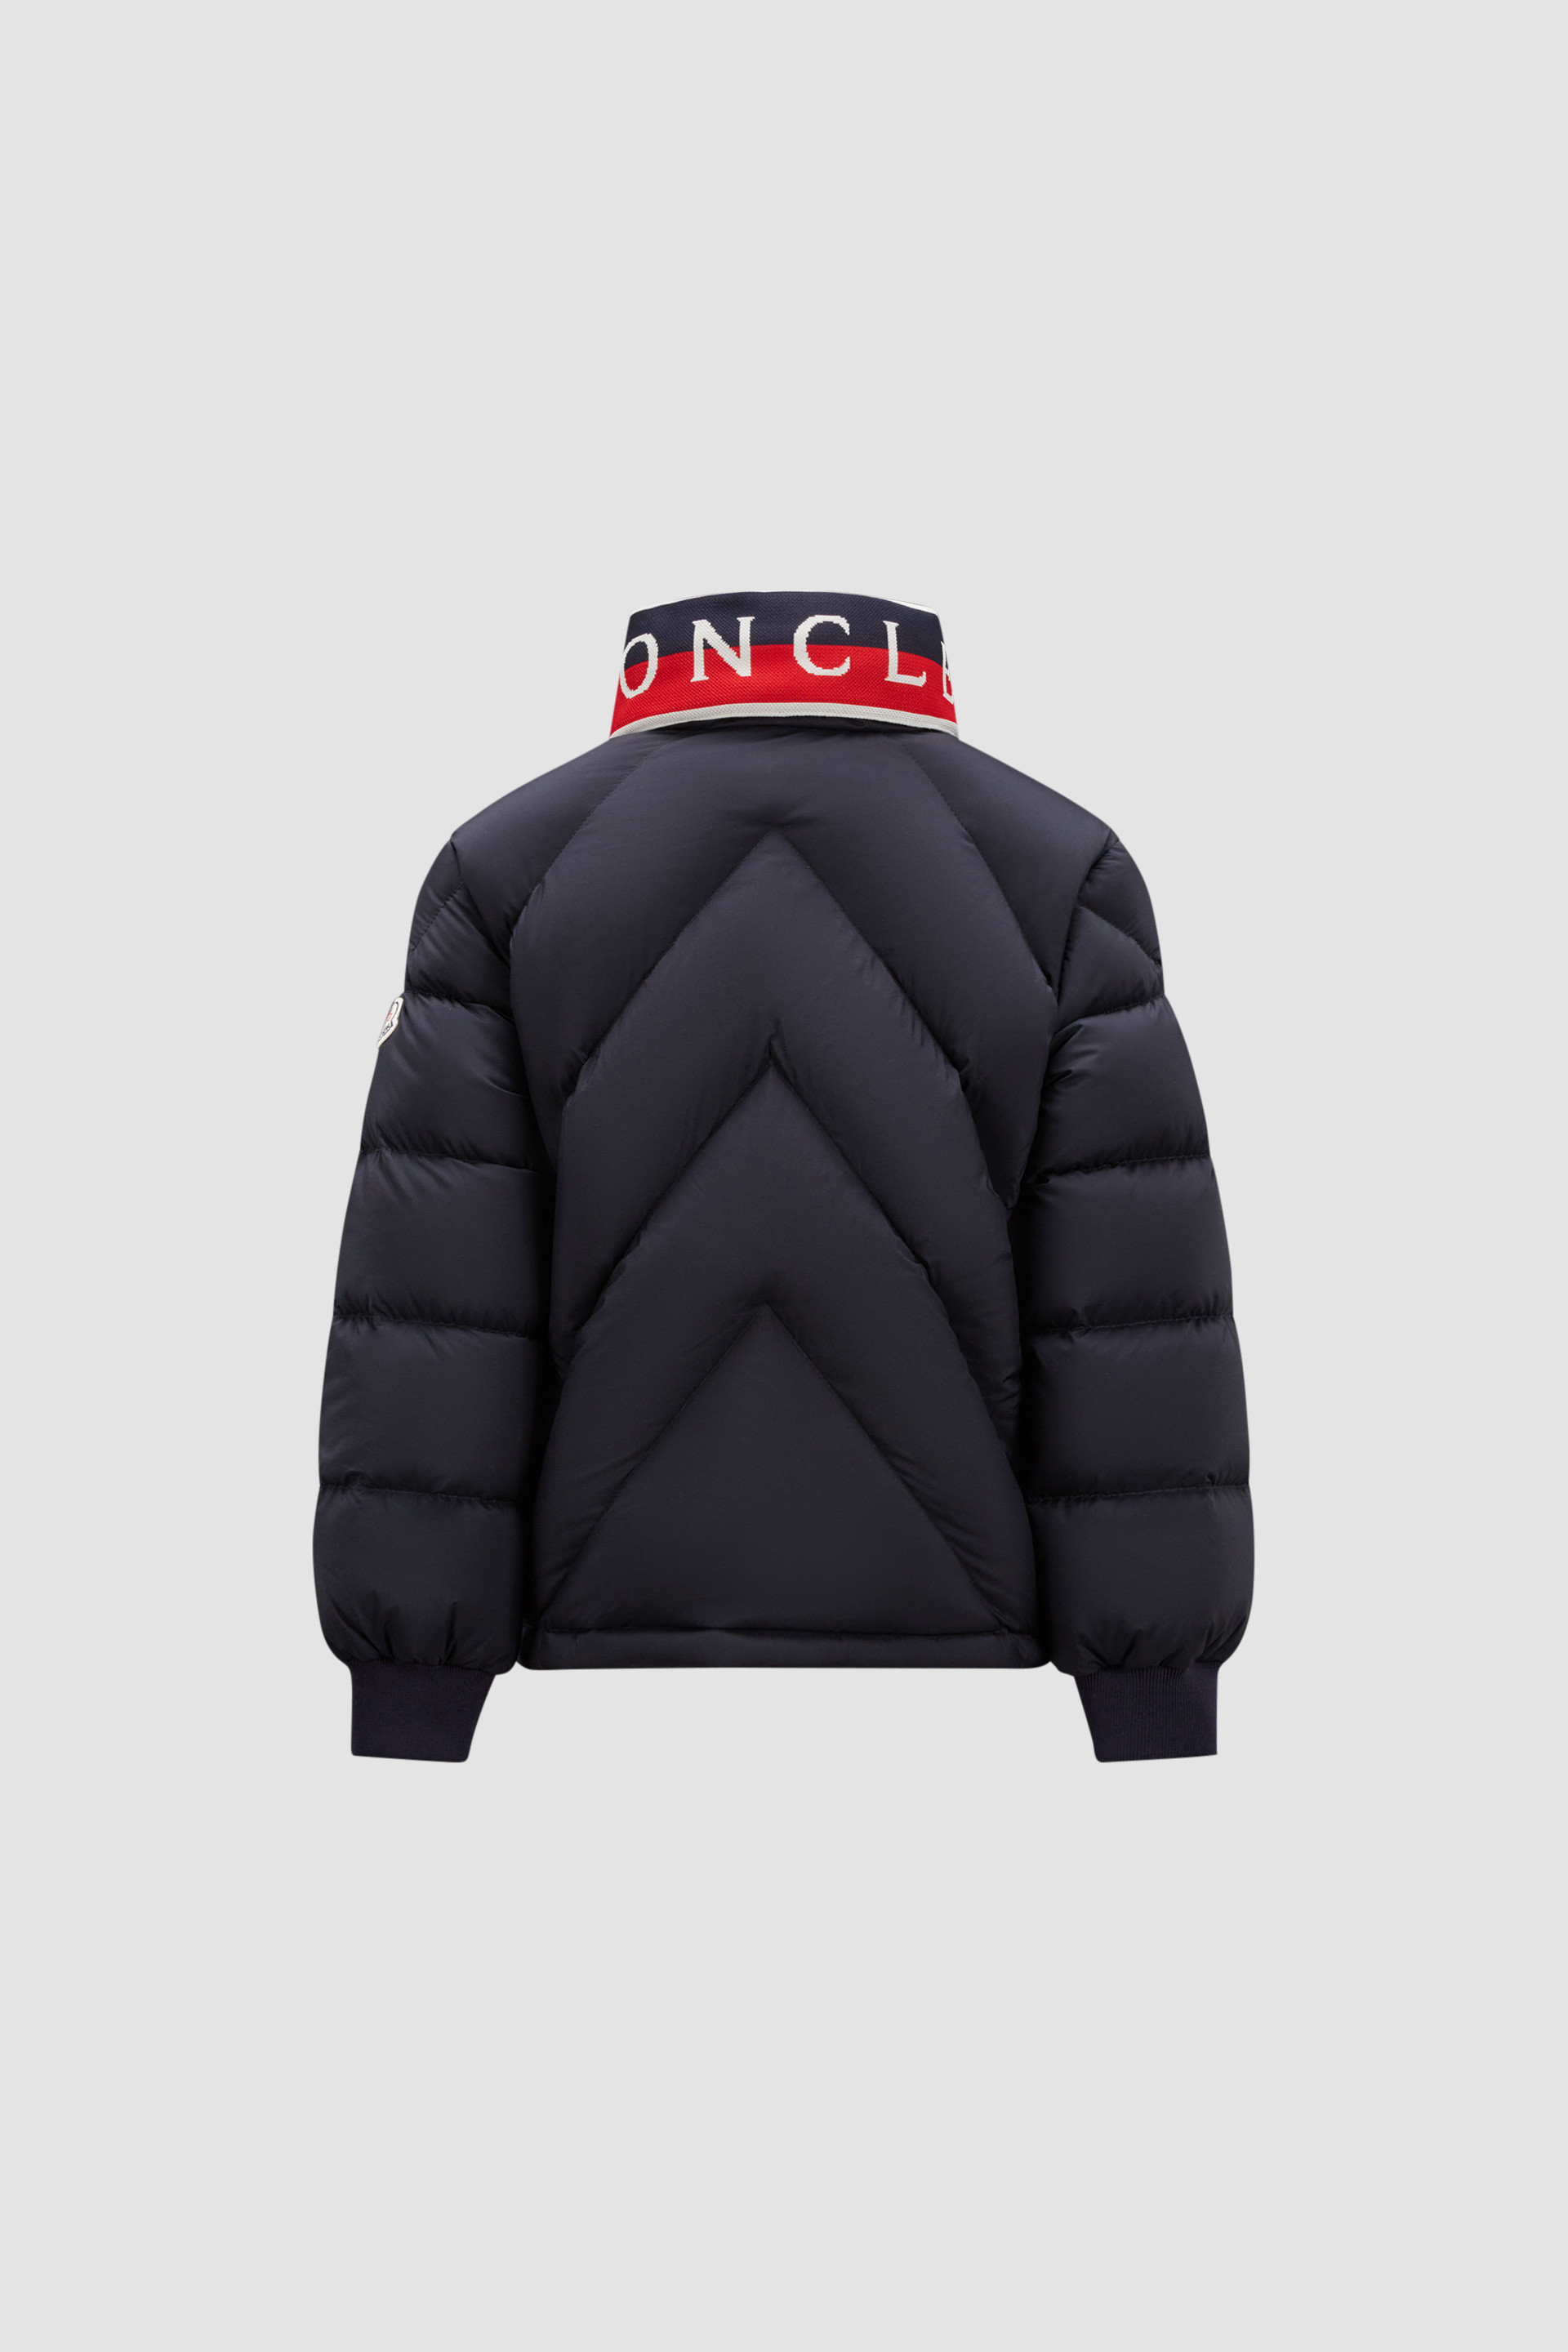 Moncler Children - Outerwear, Clothing & Accessories